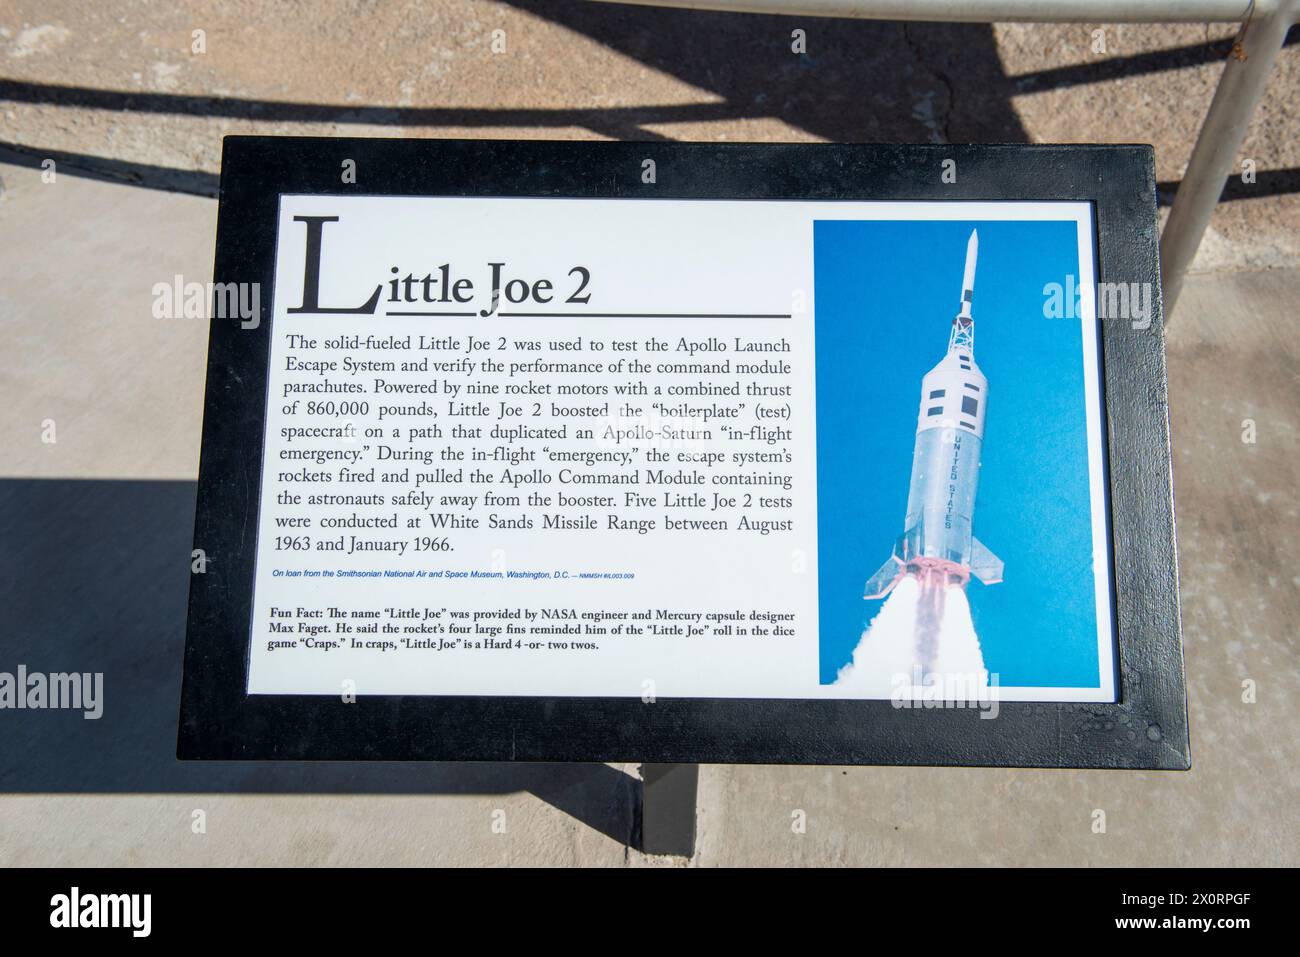 Information plaque for the Little Joe rocket at the Museum of Space History in Alamogordo, NM, USA Stock Photo